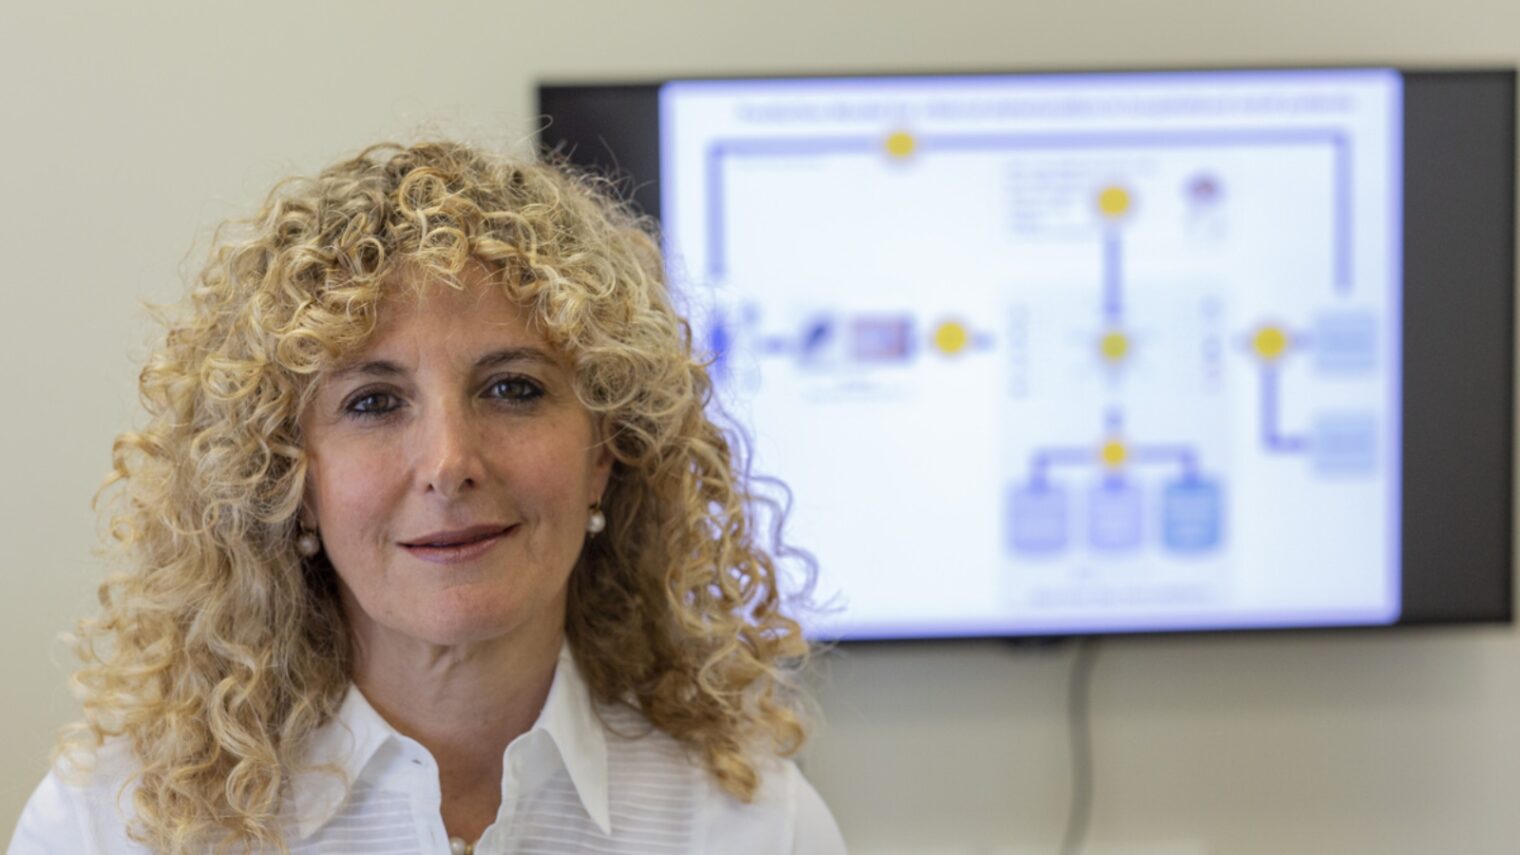 Ahuva Weiss-Meilik, head of Tel Aviv Sourasky Medical Center’s I-Medata center and Data Science and Quality Division. Photo: courtesy